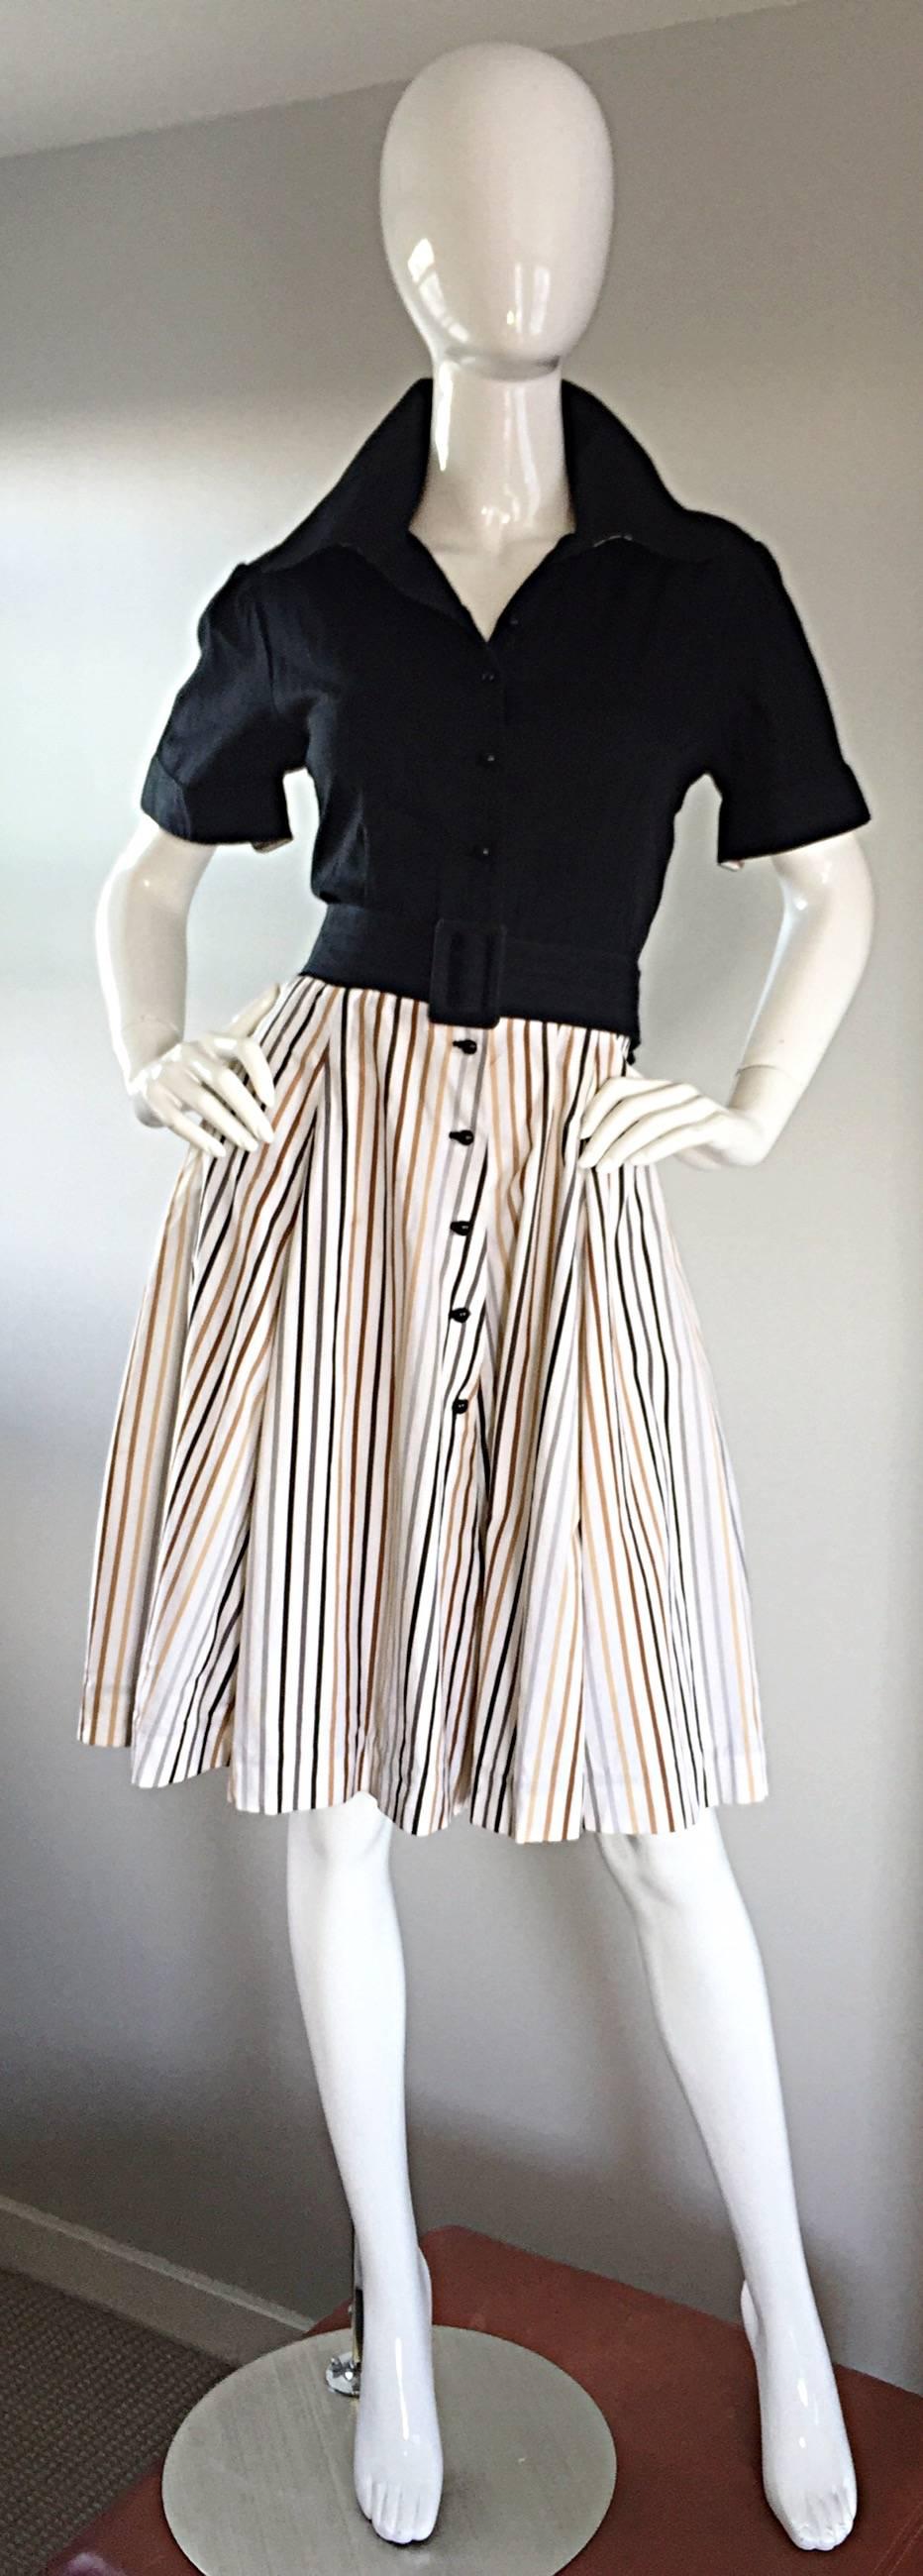 Chic vintage AL'S ATTIRE of SAN FRANCISCO Custom Made 1990s does 1950s rockabilly dress! Features a black textured cotton bodice, with a soft cotton pinstripe full skirt, with colors of tan, beige and gray. Buttons up the bodice. Original detachable